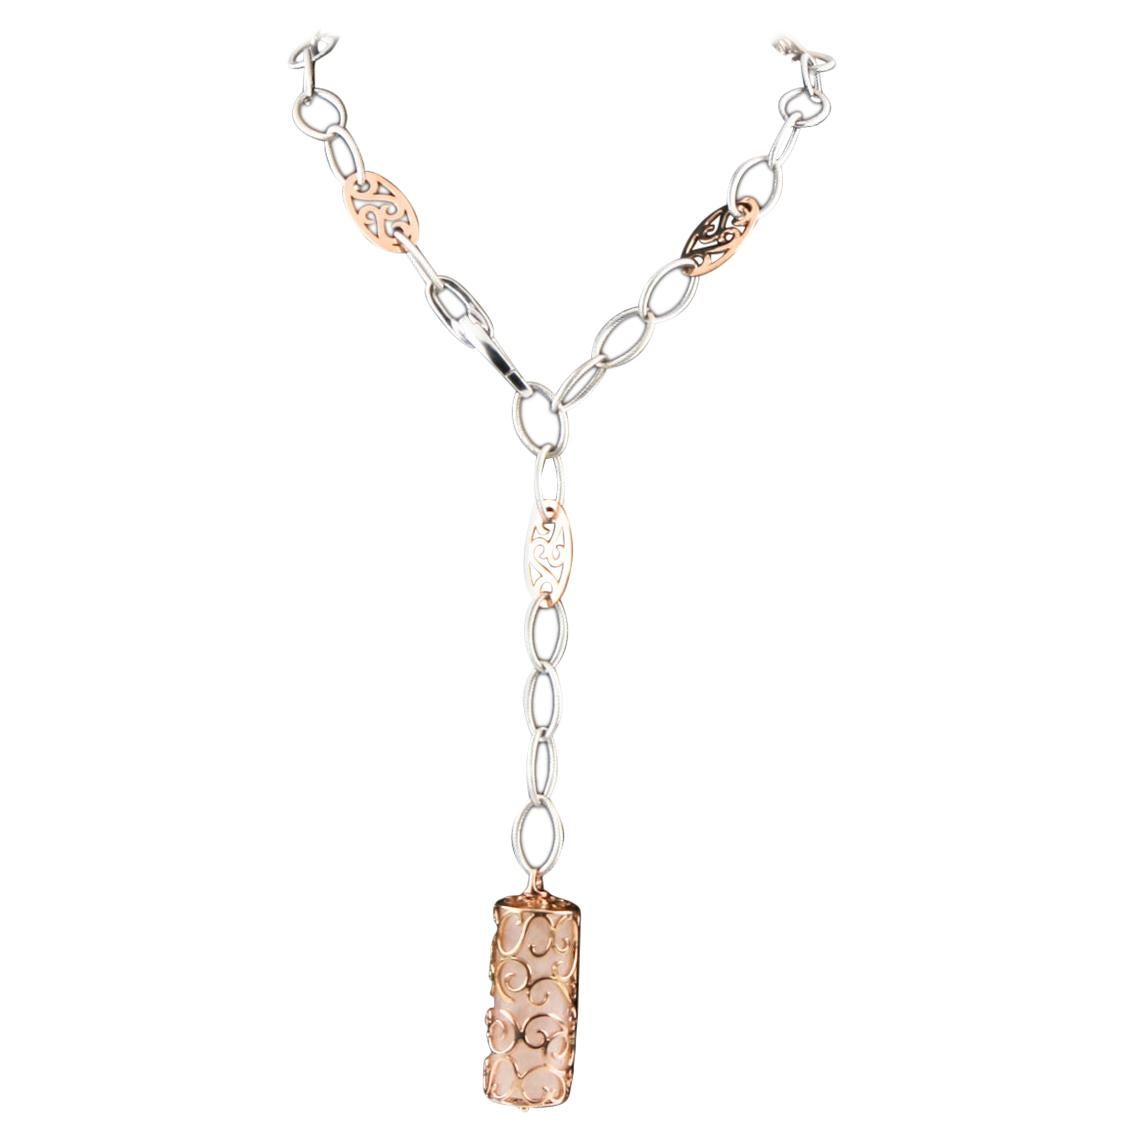 Unique Necklace Featuring Coral Pendant in Cage Set in 14k White and Rose Gold For Sale